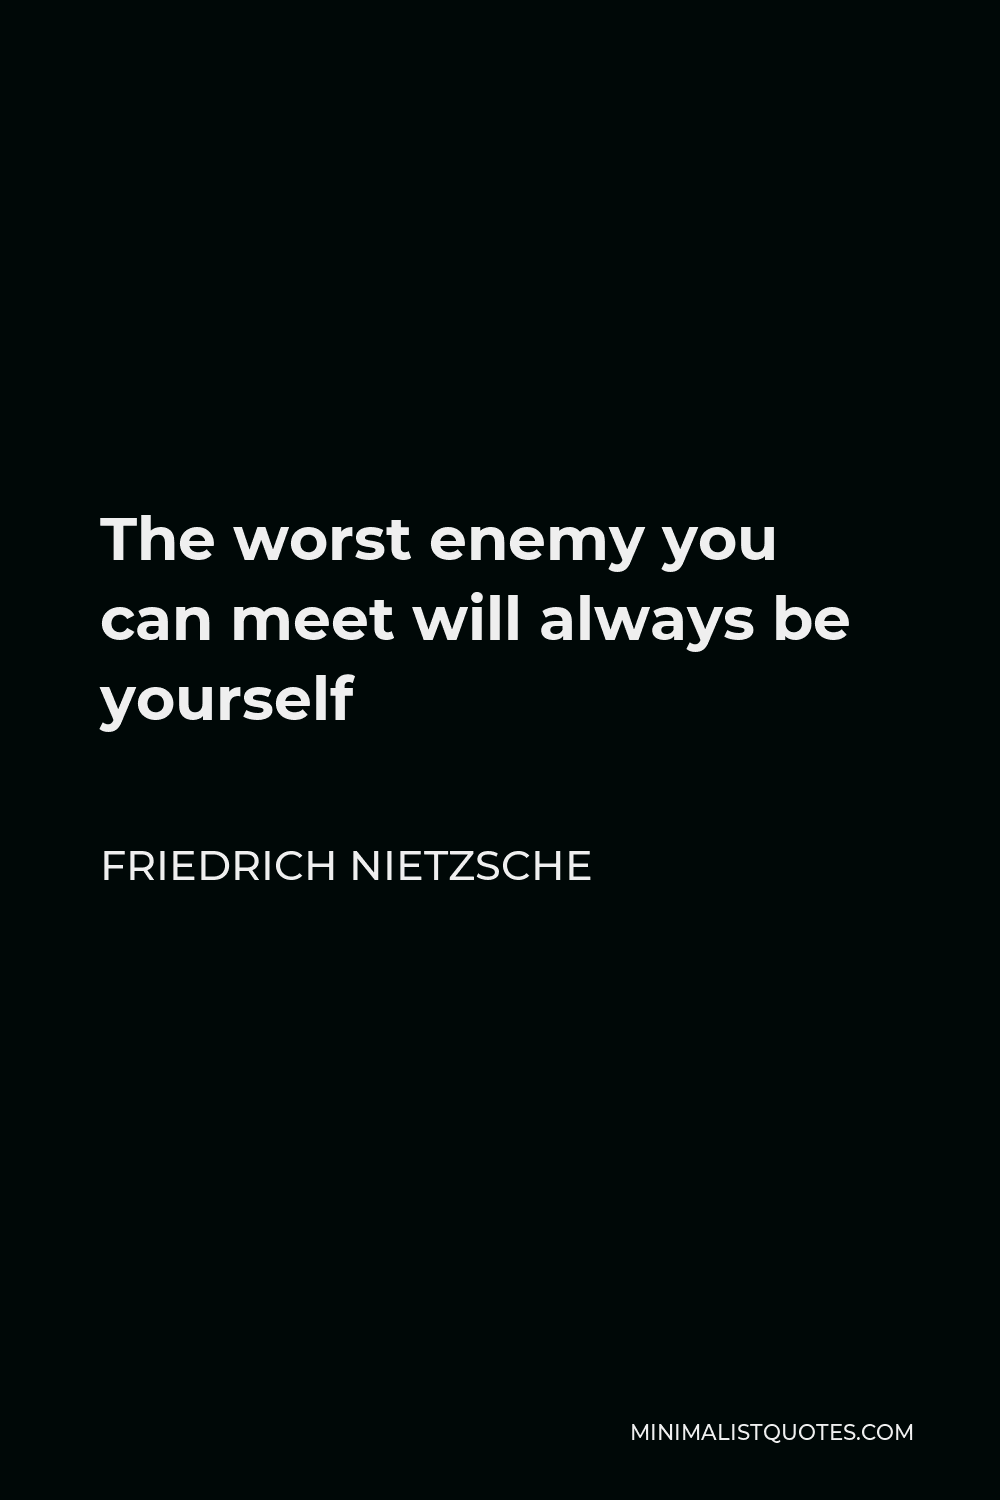 Friedrich Nietzsche Quote The Worst Enemy You Can Meet Will Always Be Yourself